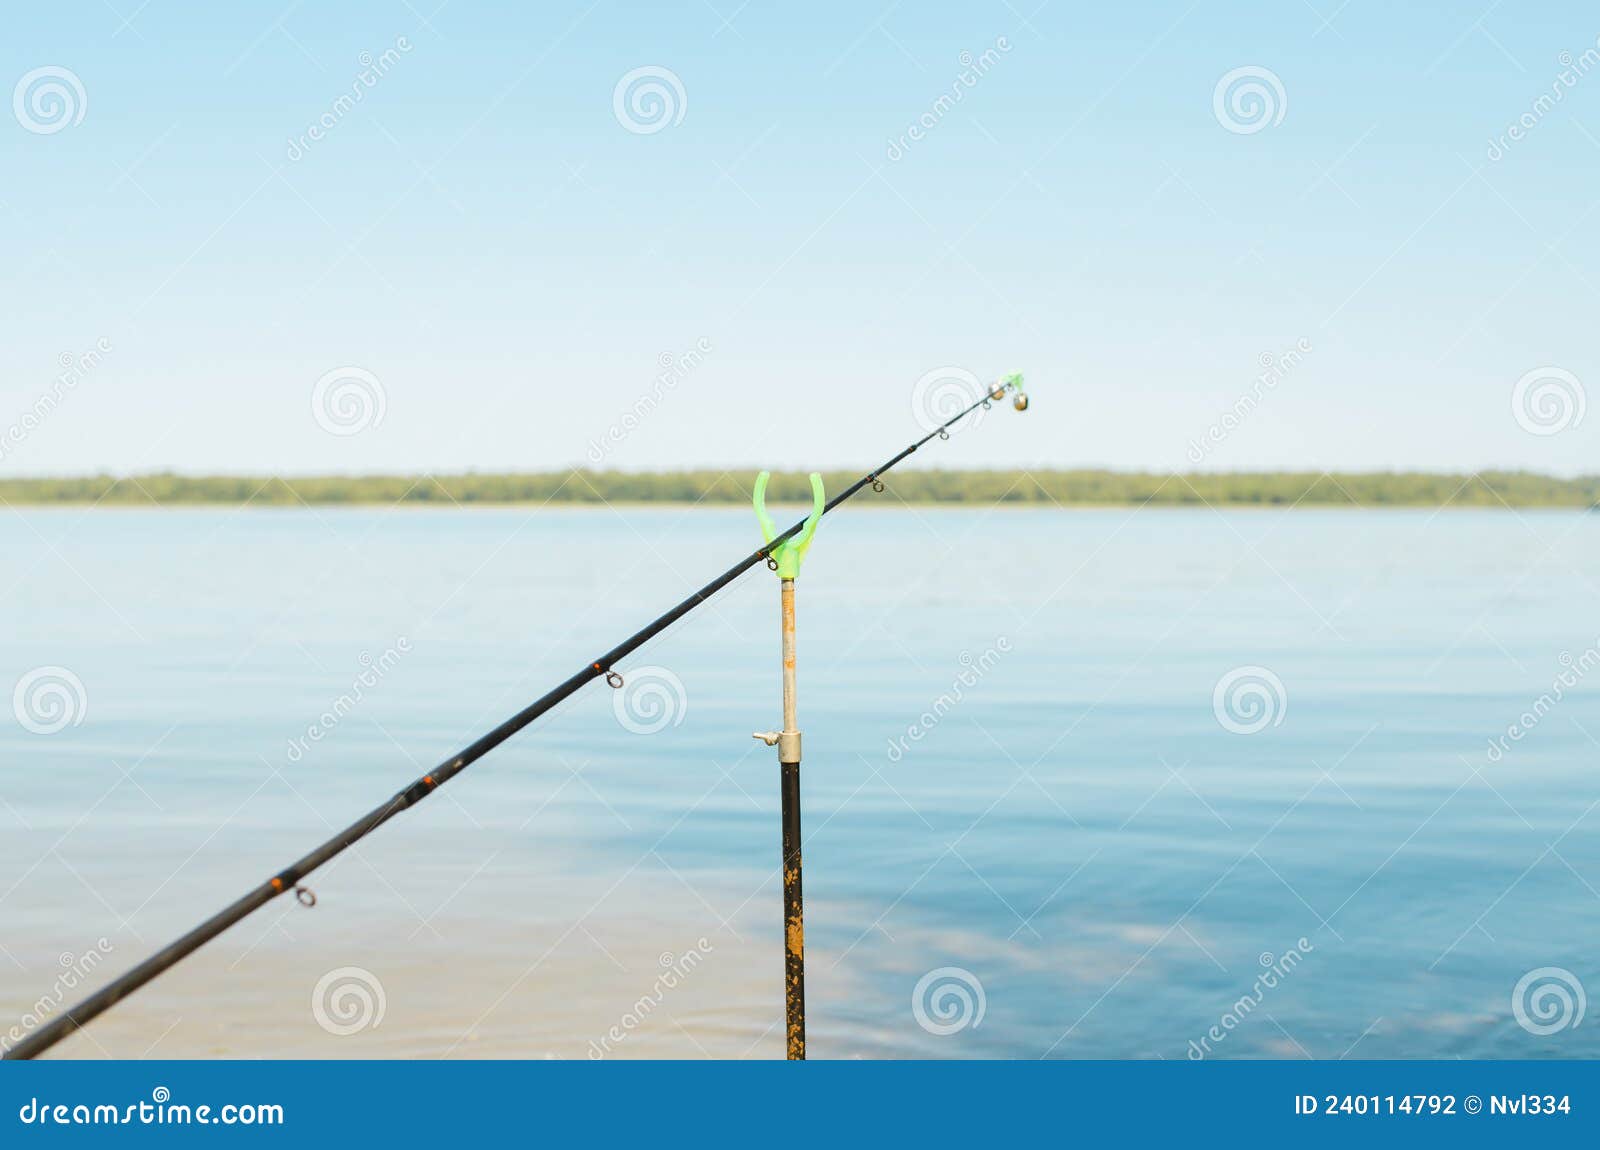 Close-up of Fishing Rod with Bell on Stand on Lake Outdoors. Summer Fishing  Stock Photo - Image of tackle, line: 240114792